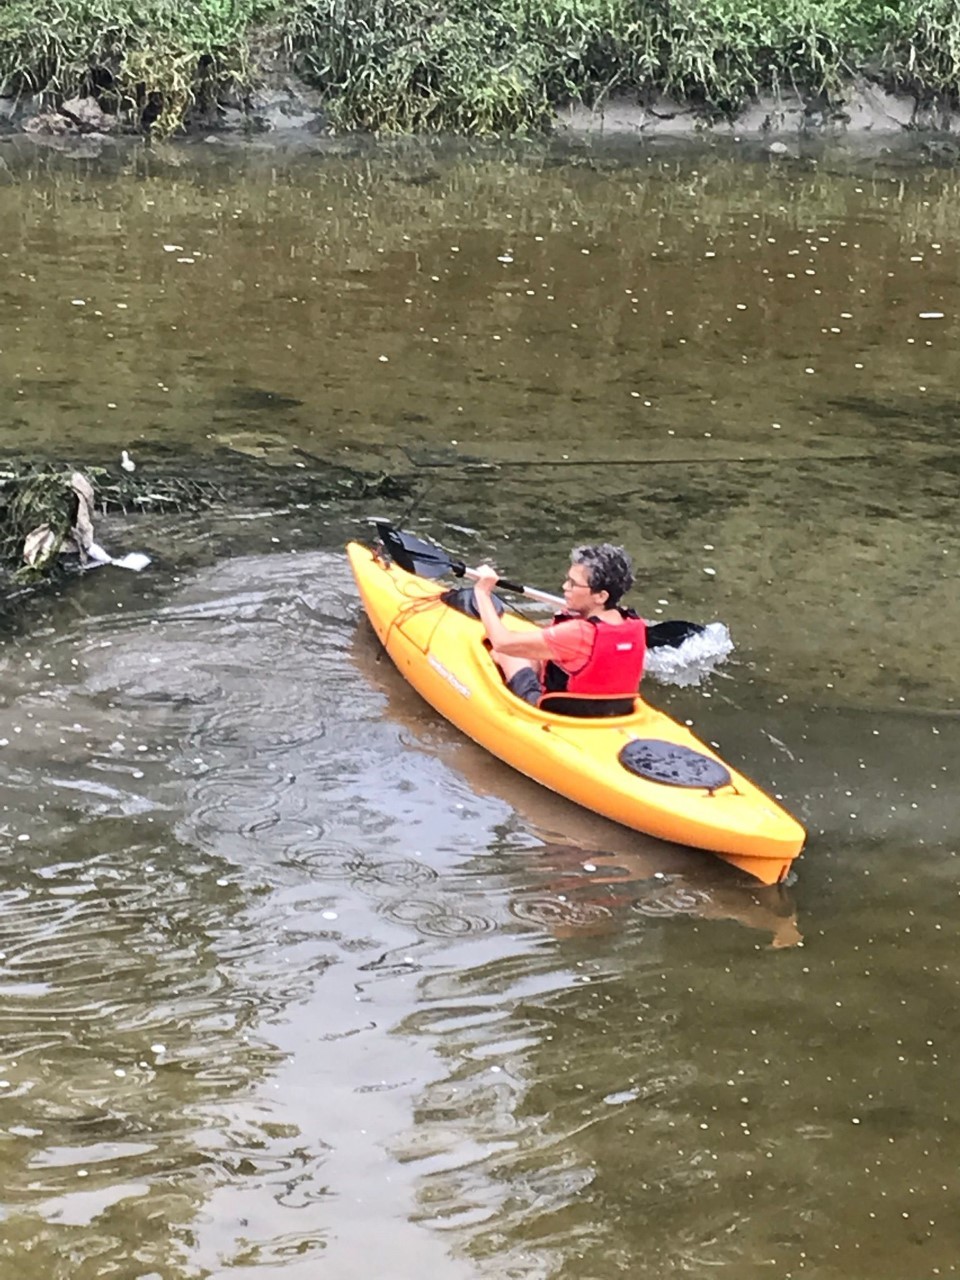 Tracy Martinez in the river with her kayak